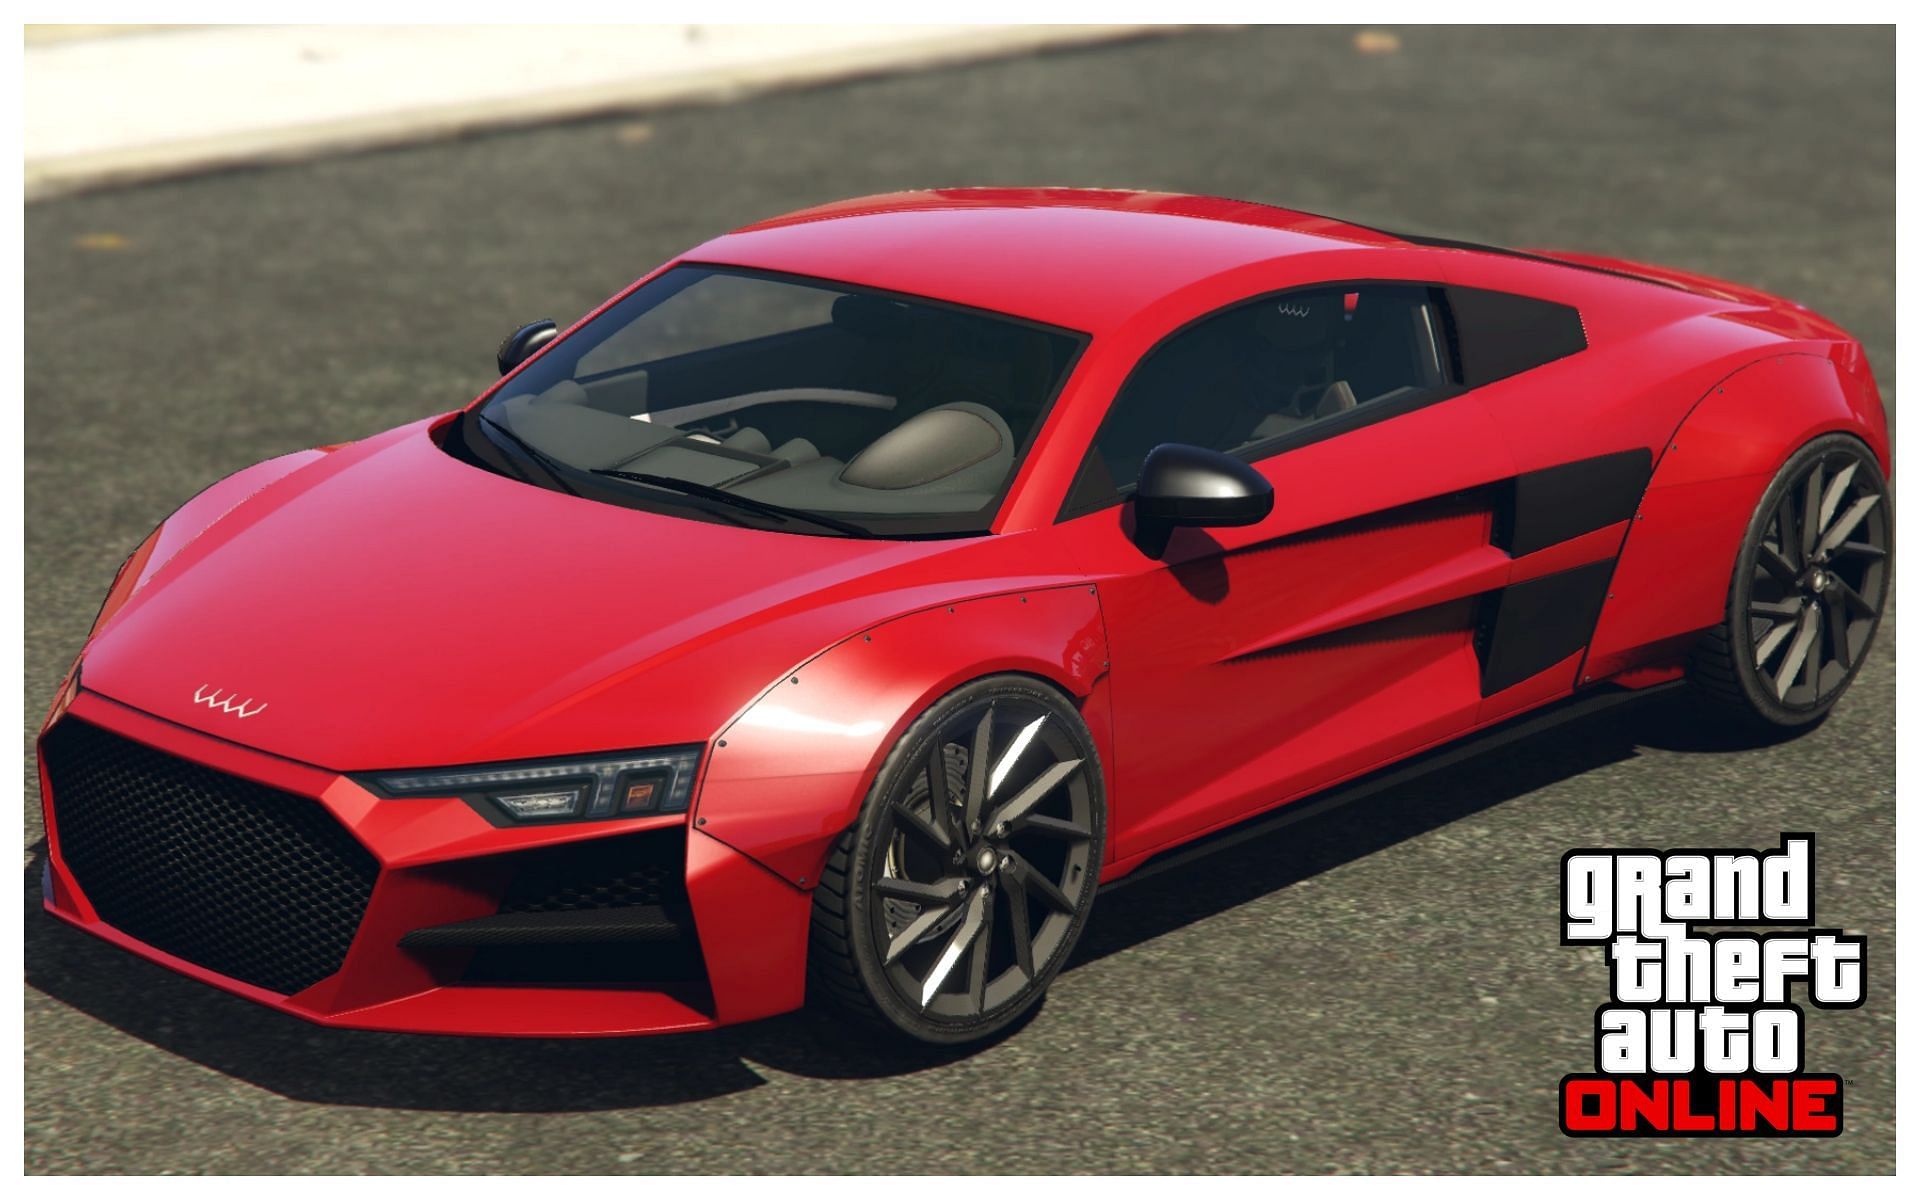 This is one of the most anticipate cars (Images via gta.fandom)